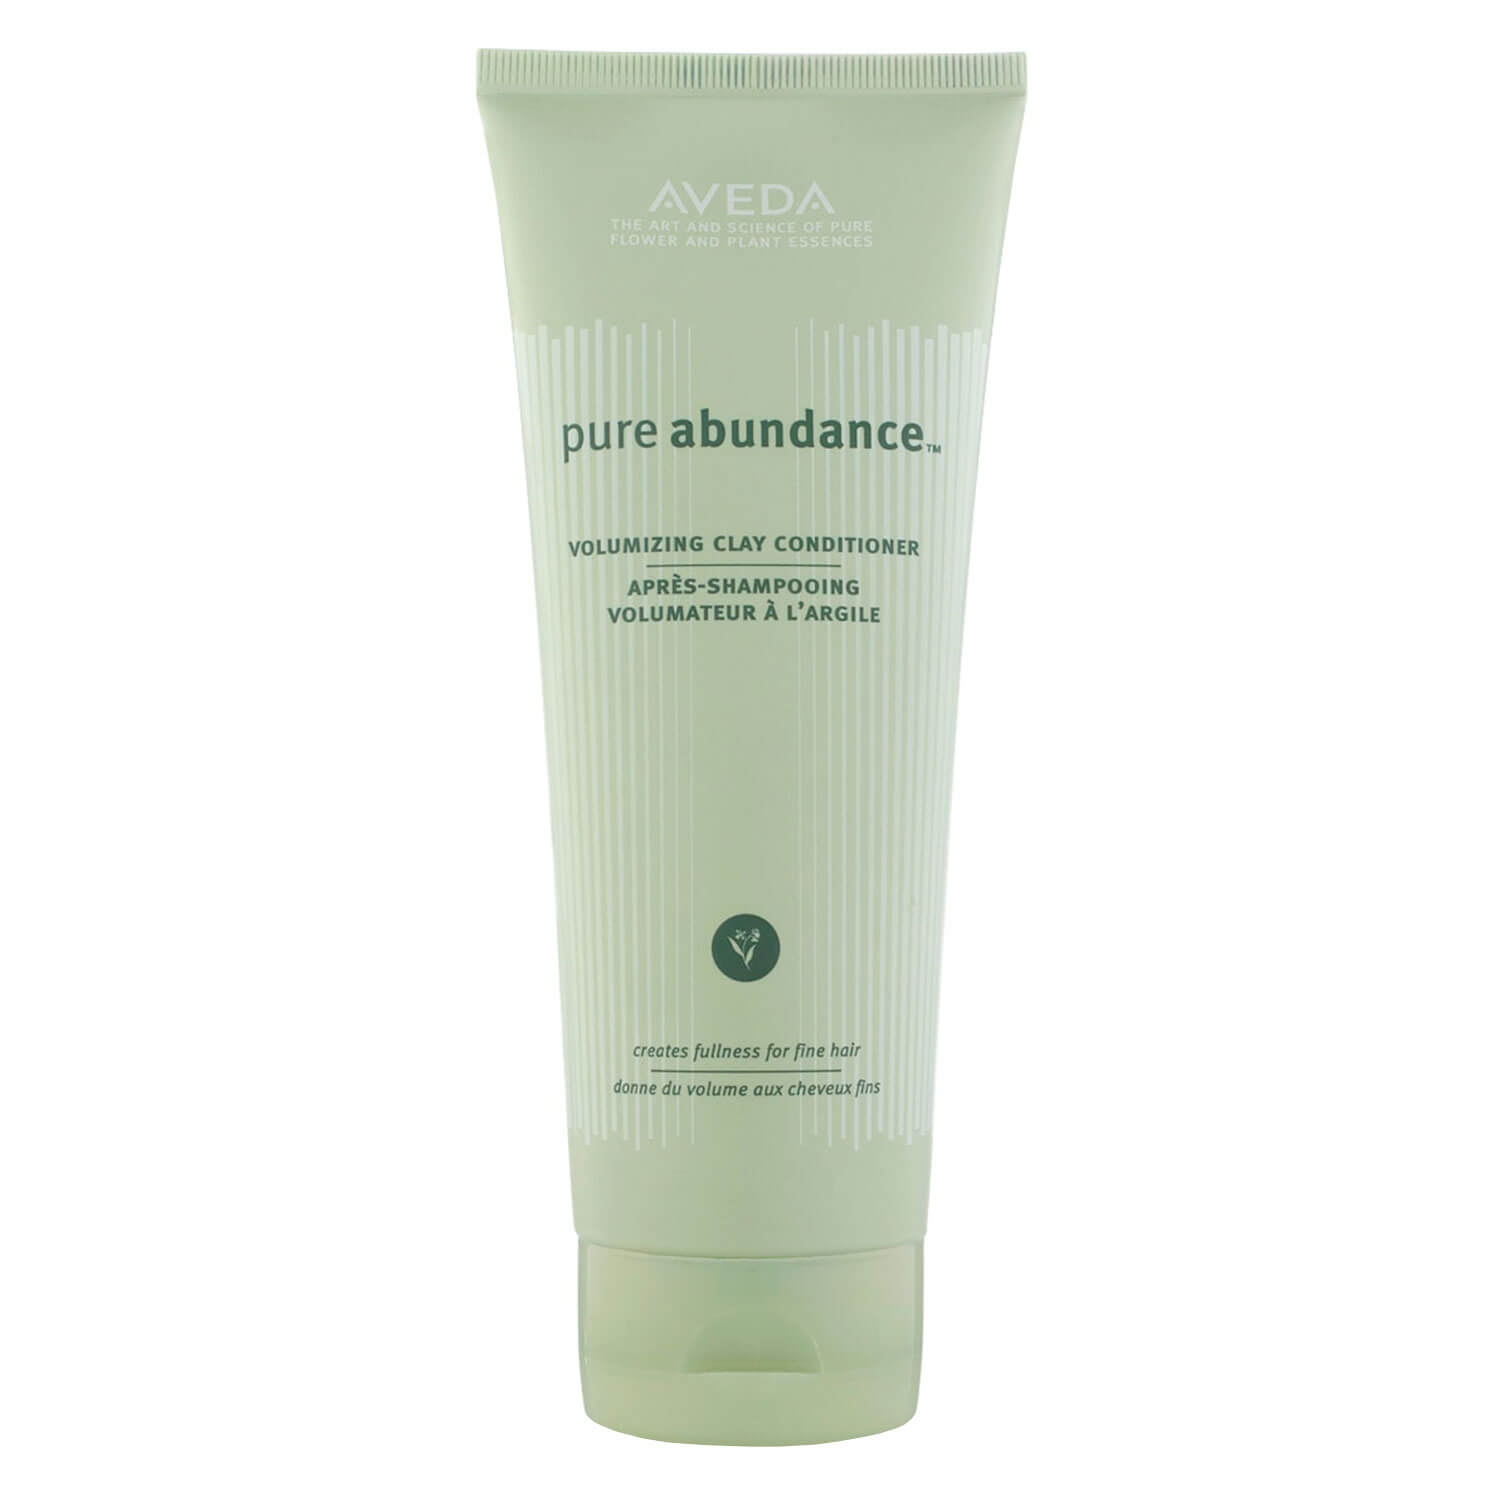 Product image from pure abundance - volumizing clay conditioner